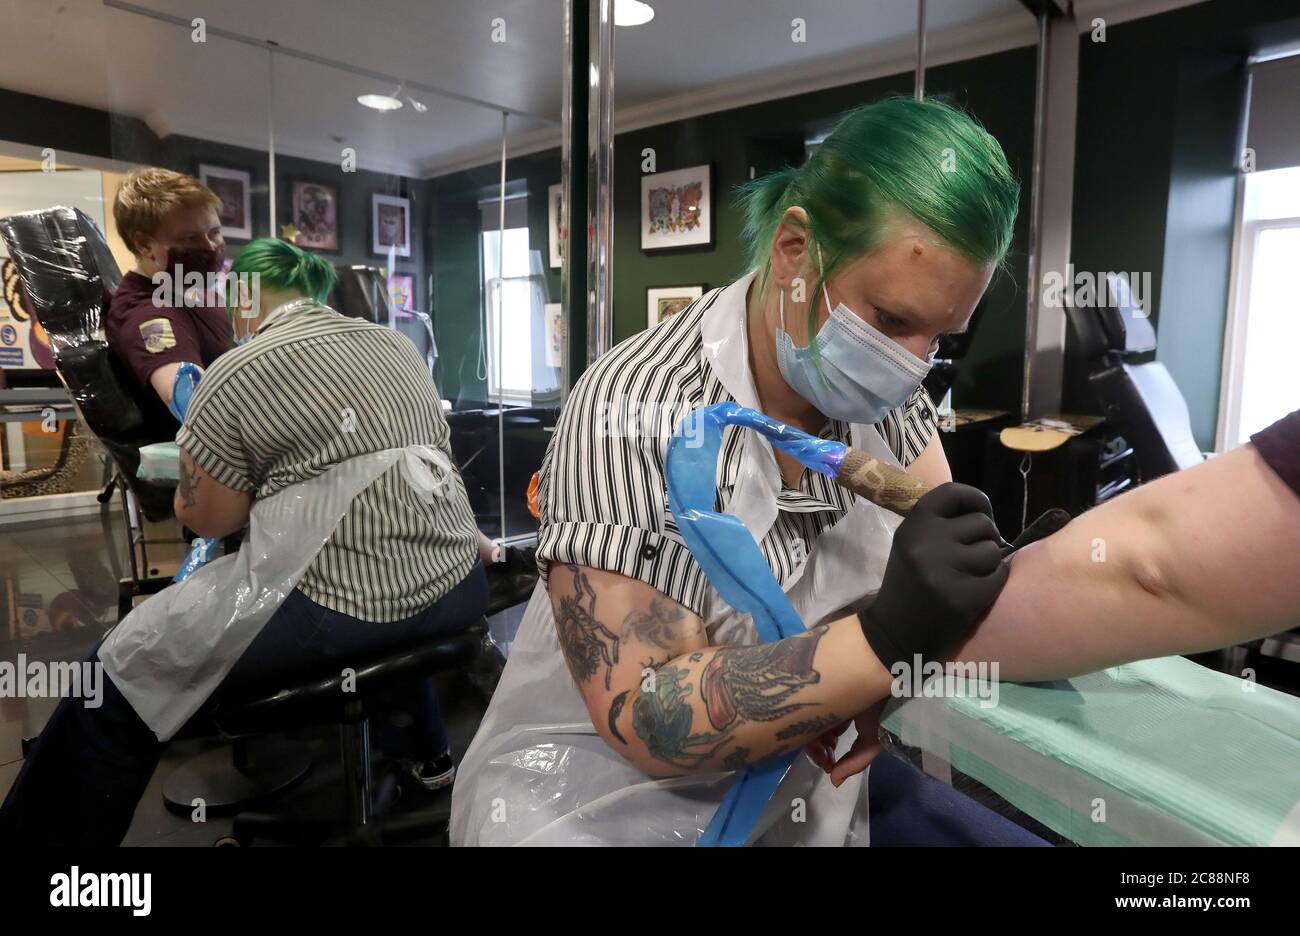 Tattoo Artist Tam Hadfield From Heaven N Hell Tattoo Studios In Falkirk With Client Drew Jamieson As Scotland Continues With The Gradual Lifting Of Restrictions To Ease Out Of Lockdown Stock Photo